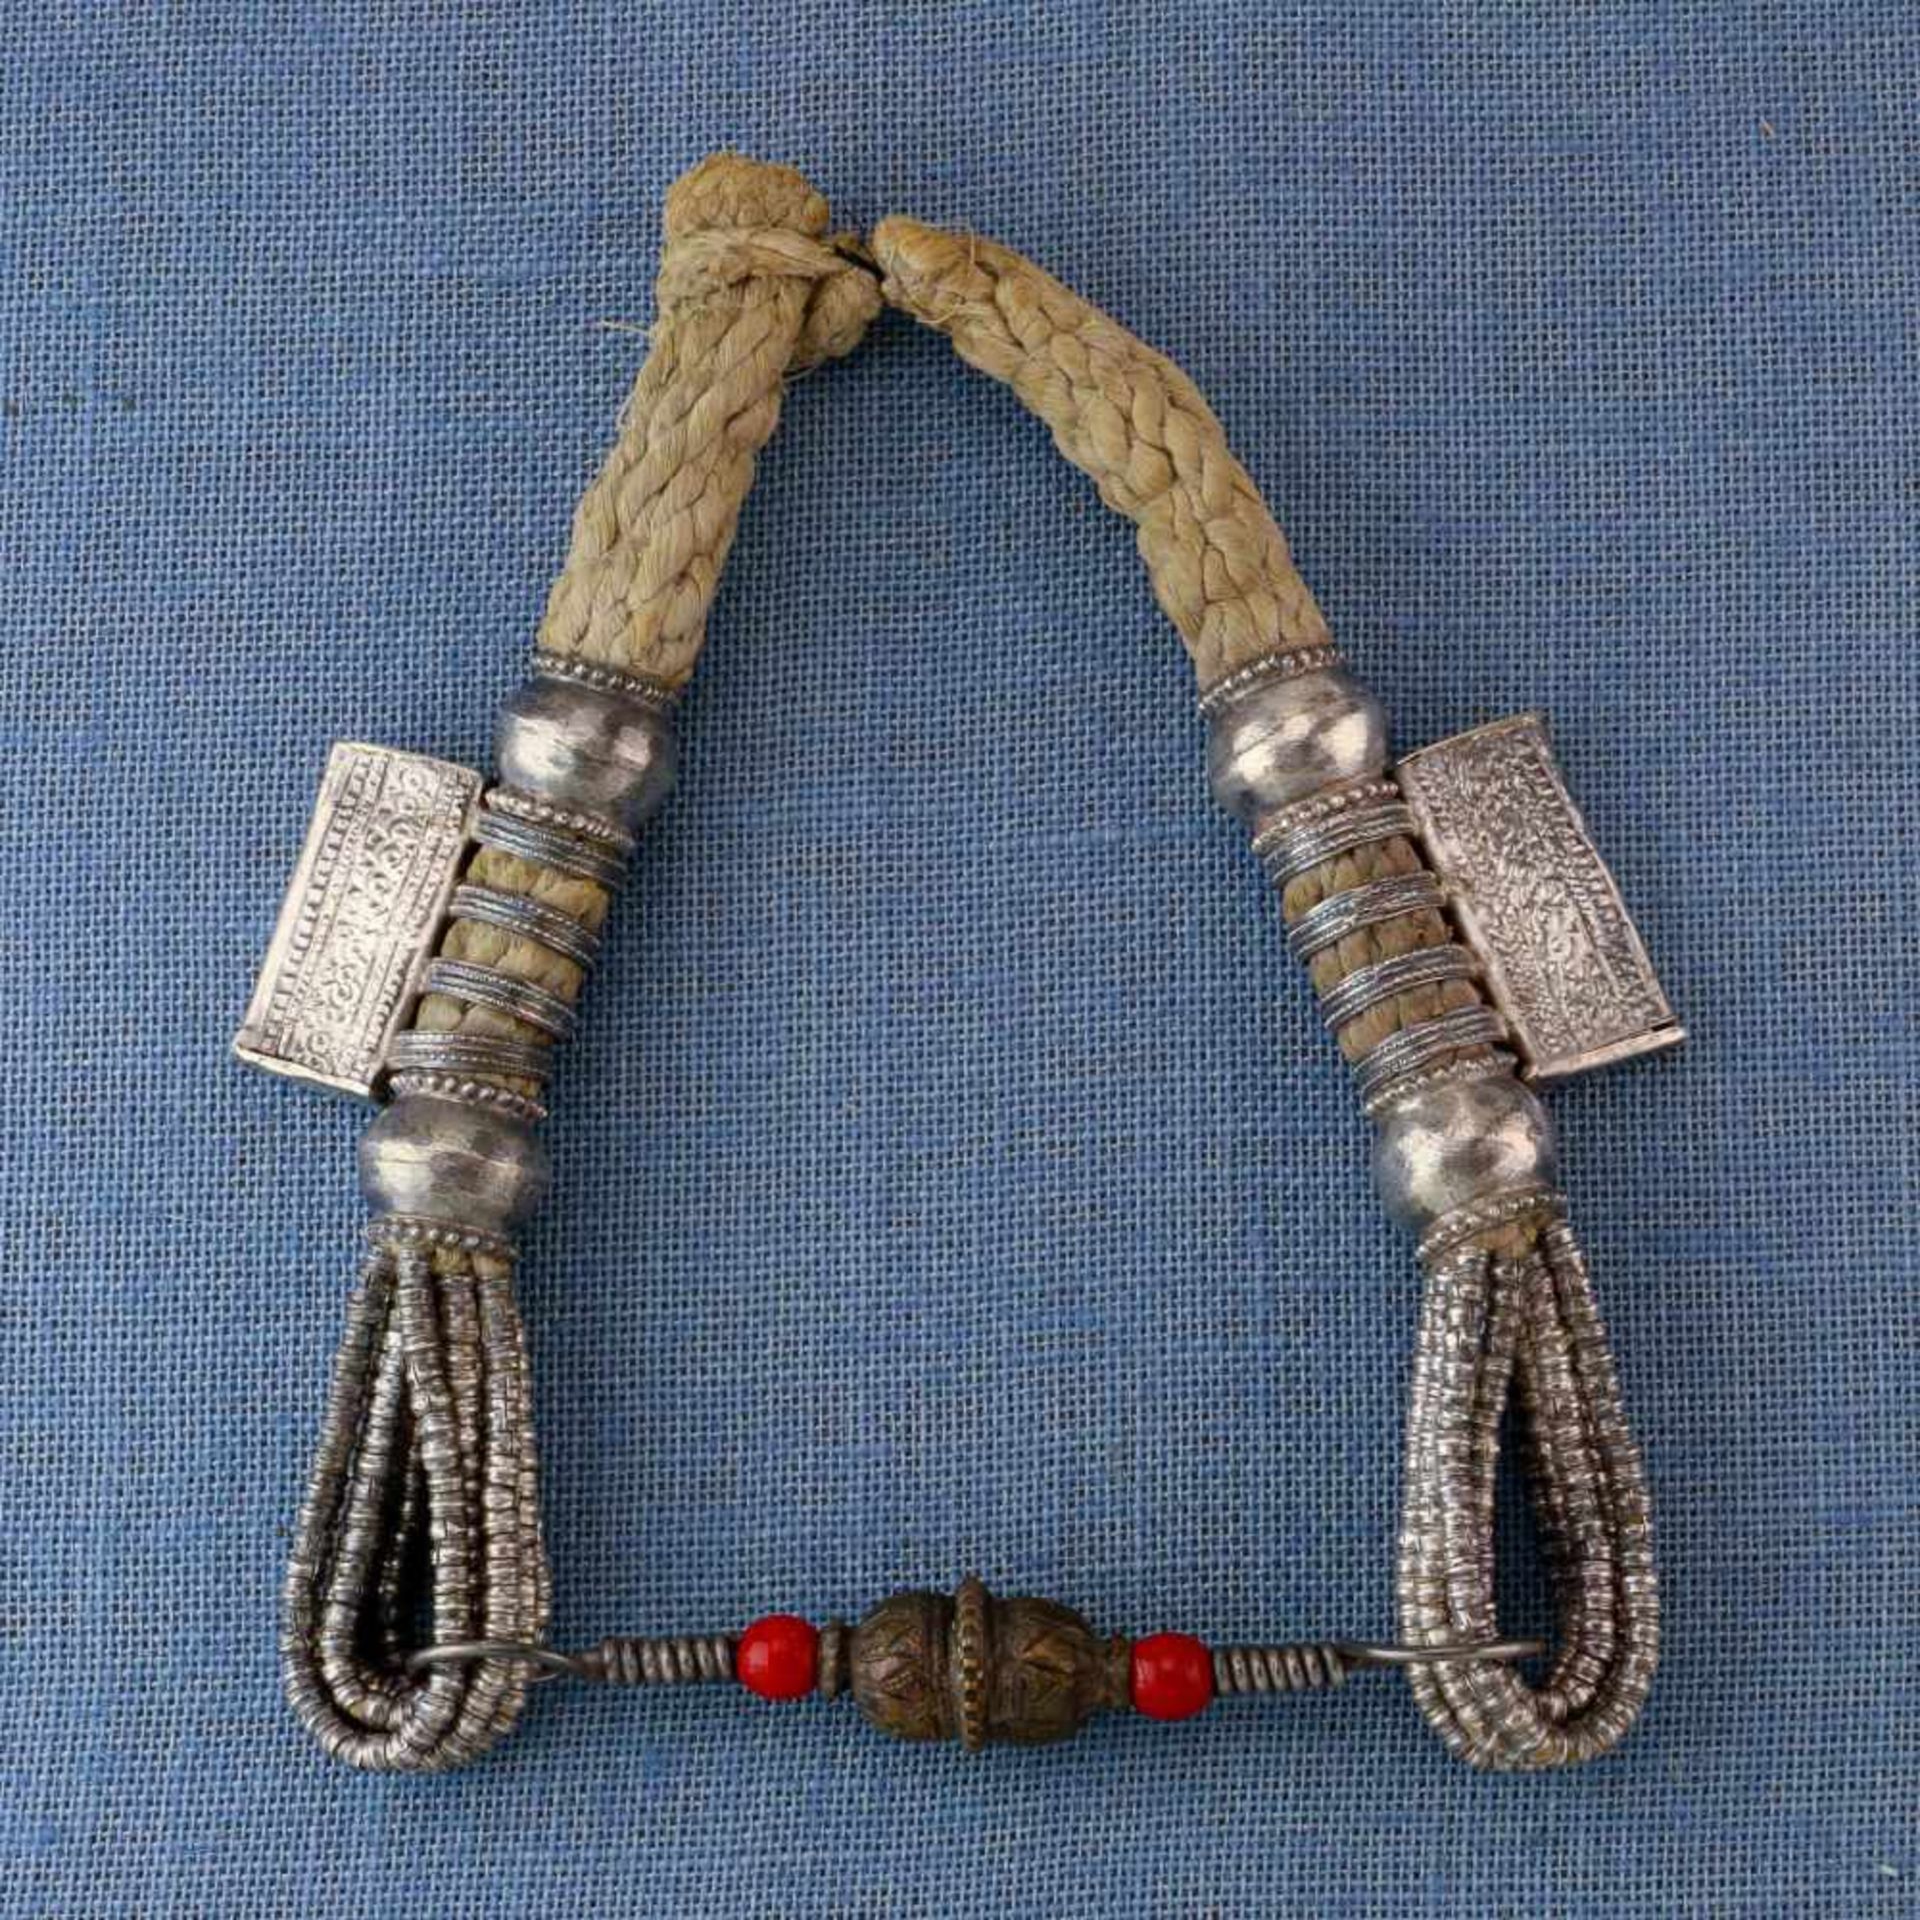 Oman, copper alloy amulet necklace, 'Digg'with two red beads, two amulet holders and twisted